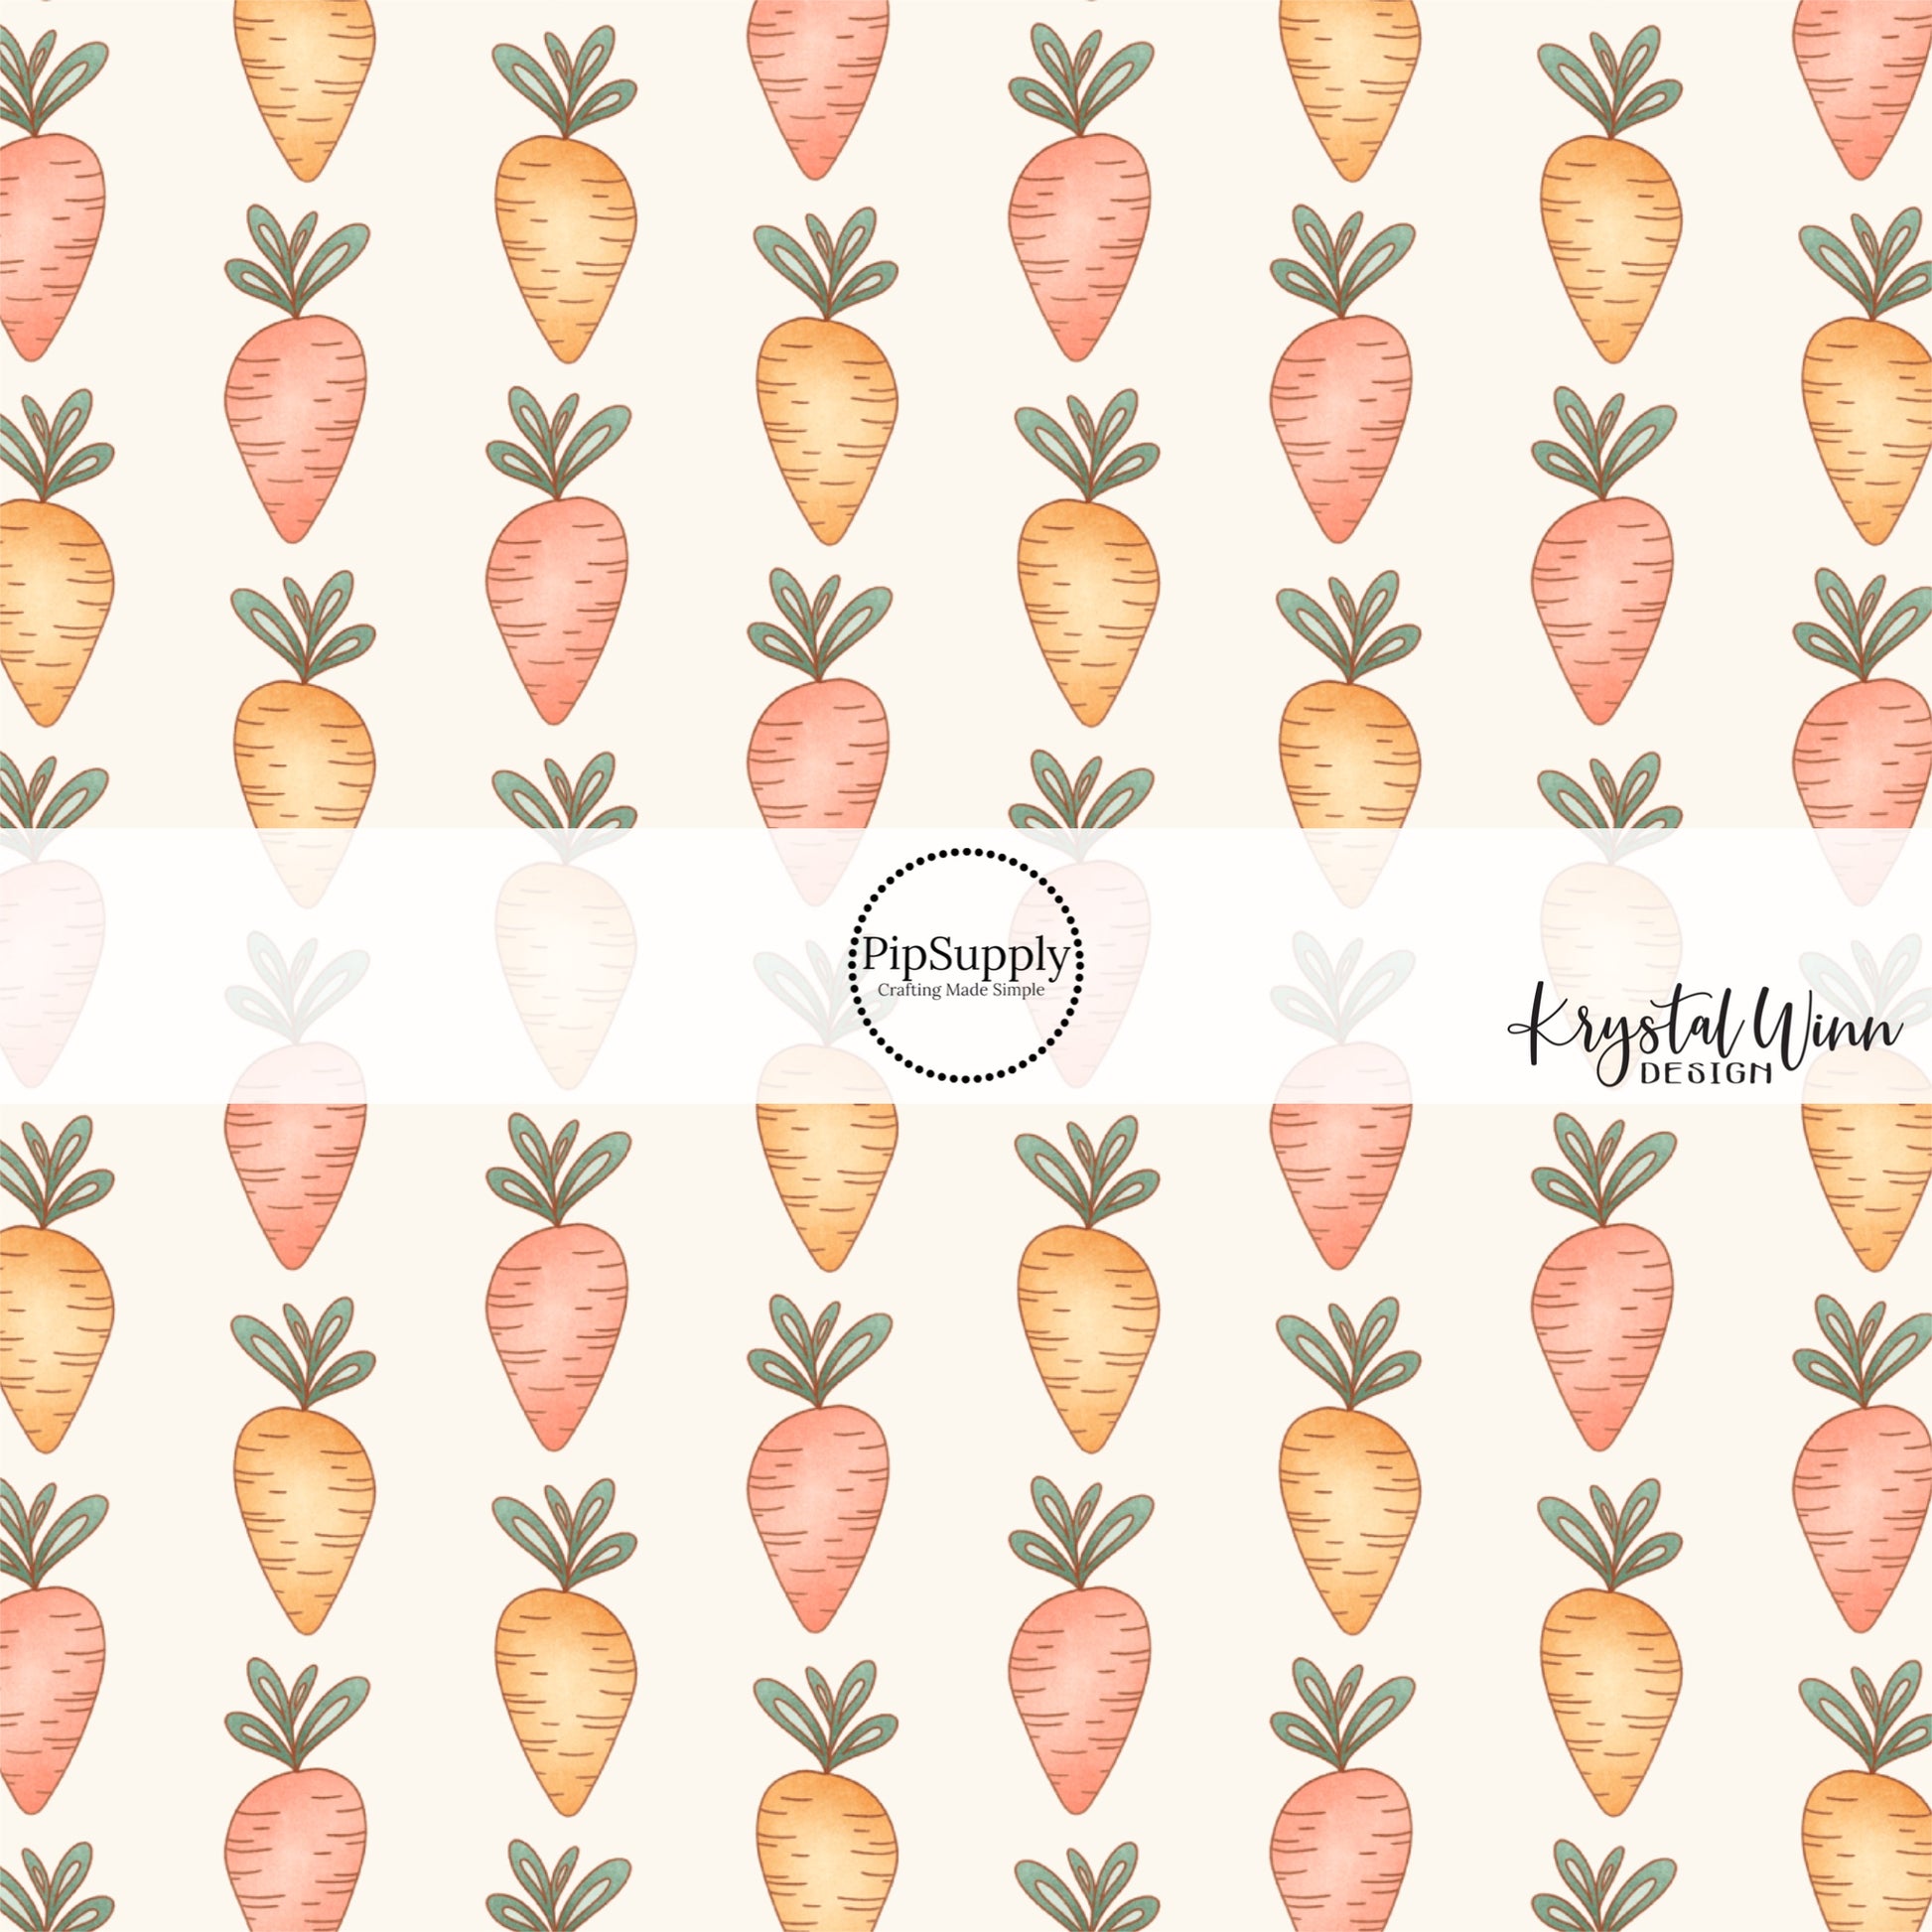 green leaves on peach and orange carrots on cream bows